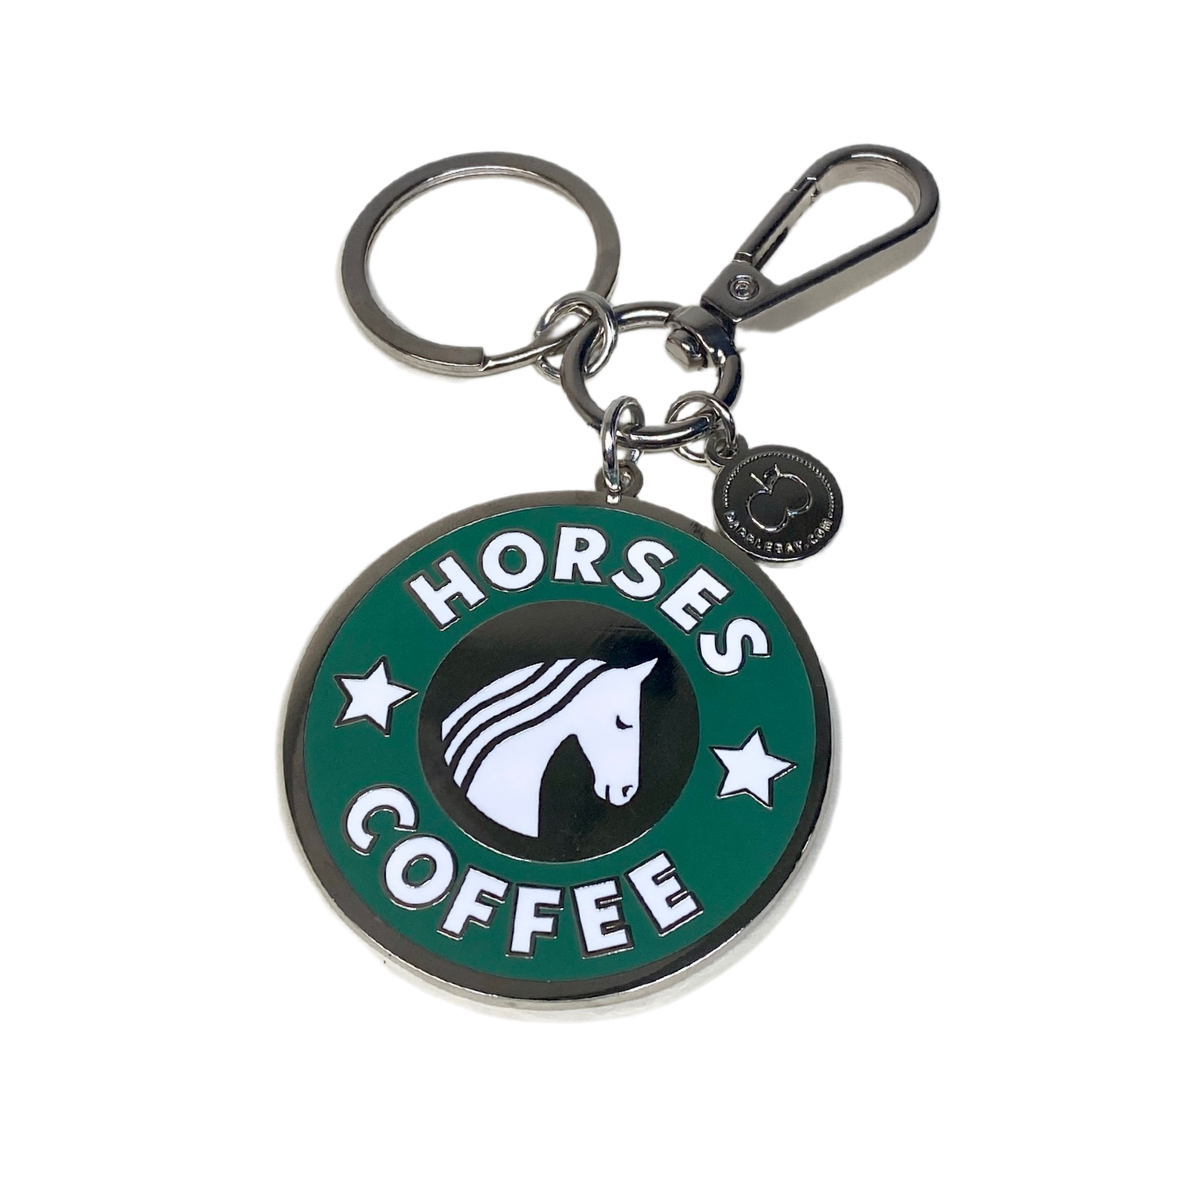 Dapplebay "Horses and Coffee" Keychain in Silver/Green - One Size